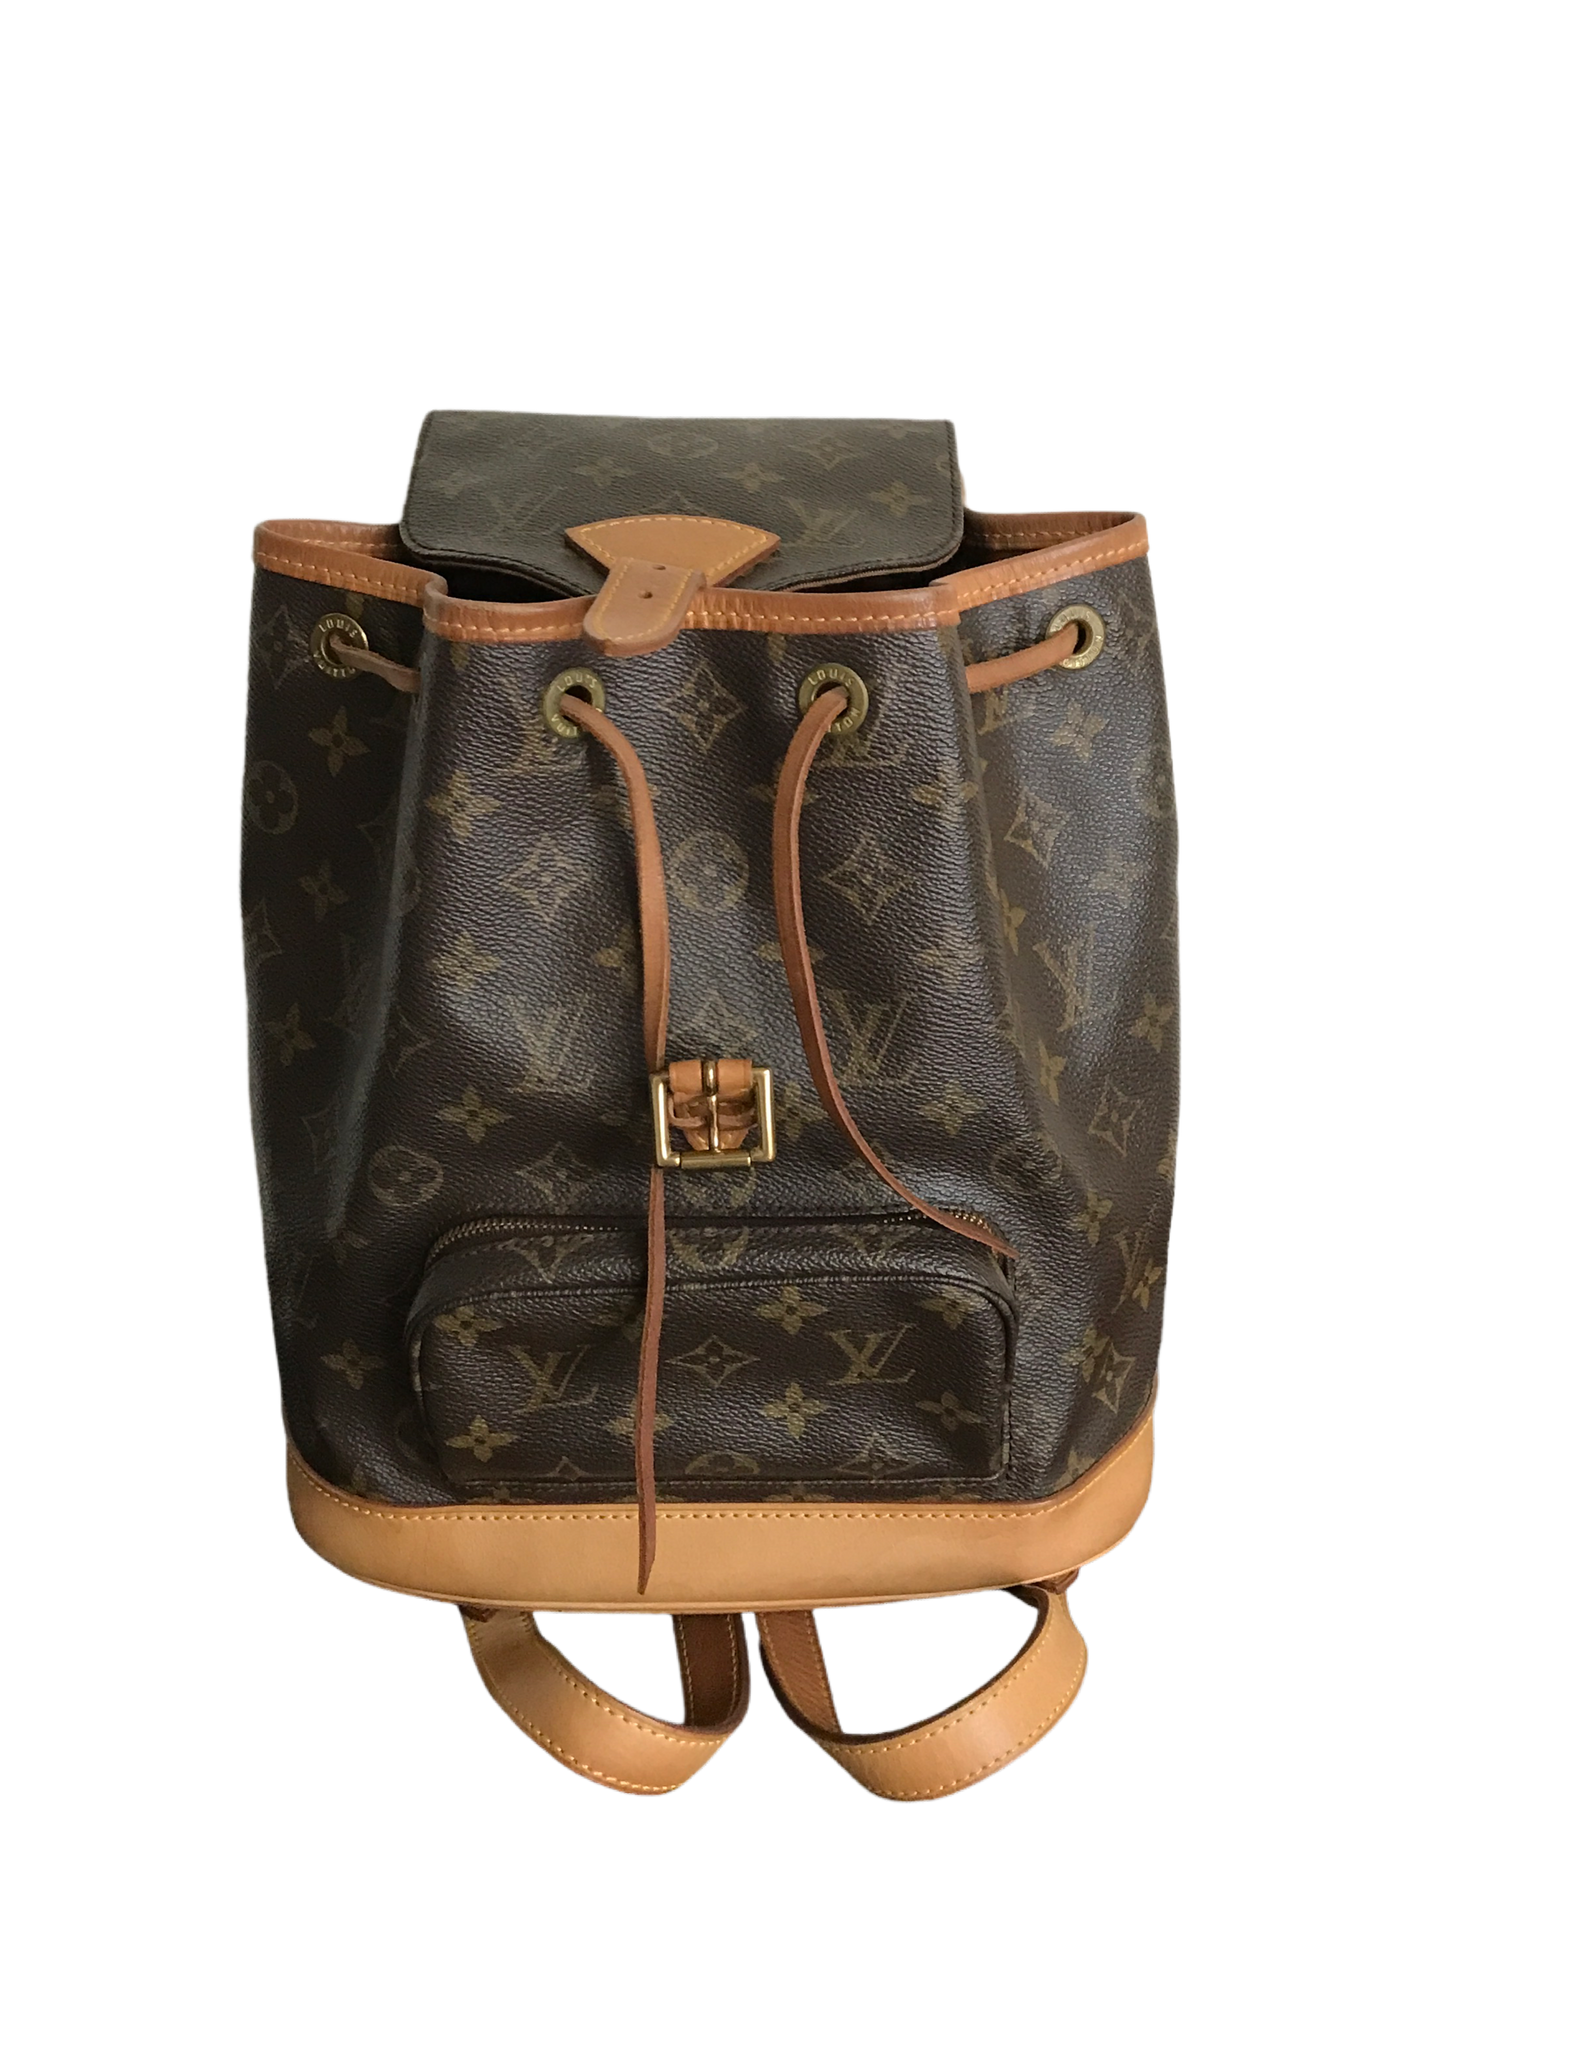 Montsouris Mm Backpack (Authentic Pre-Owned) – The Lady Bag